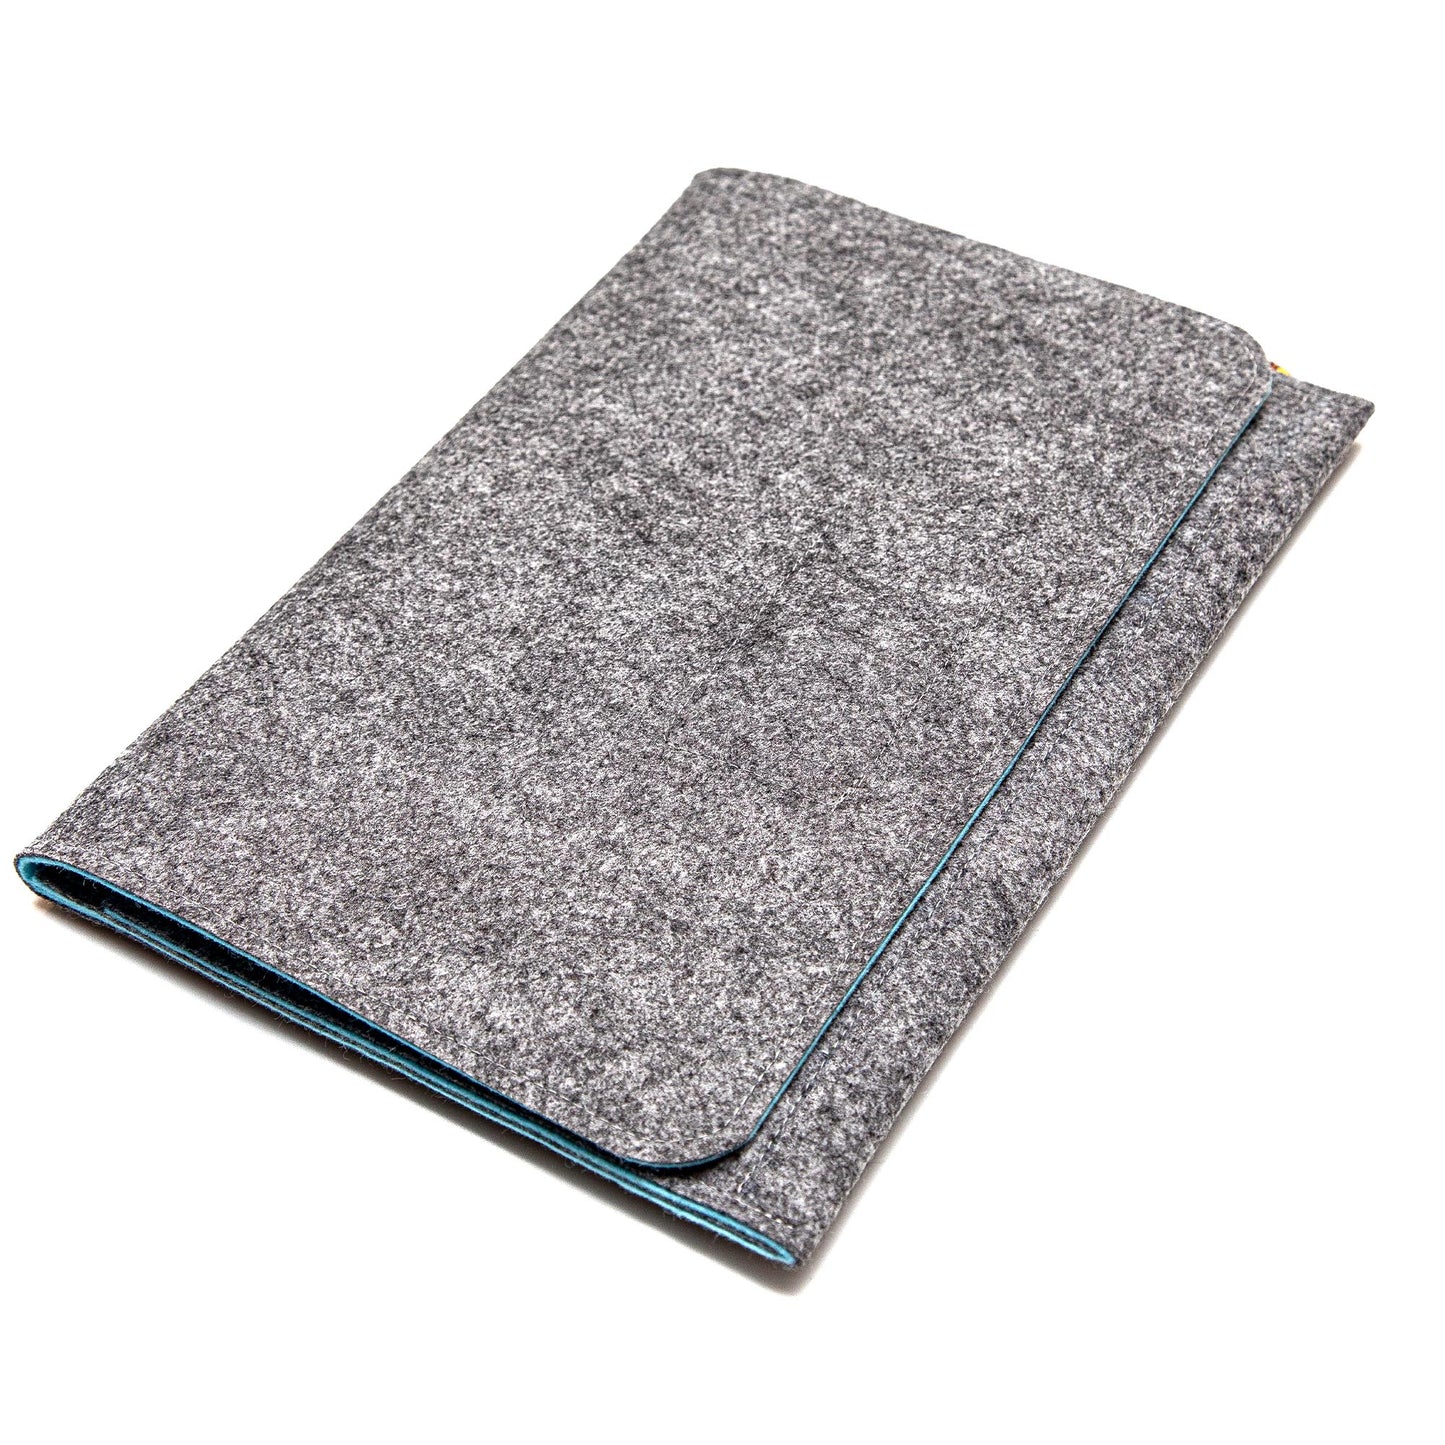 Premium Felt iPad Cover: Ultimate Protection with Accessories Pocket - Grey & Sky Blue